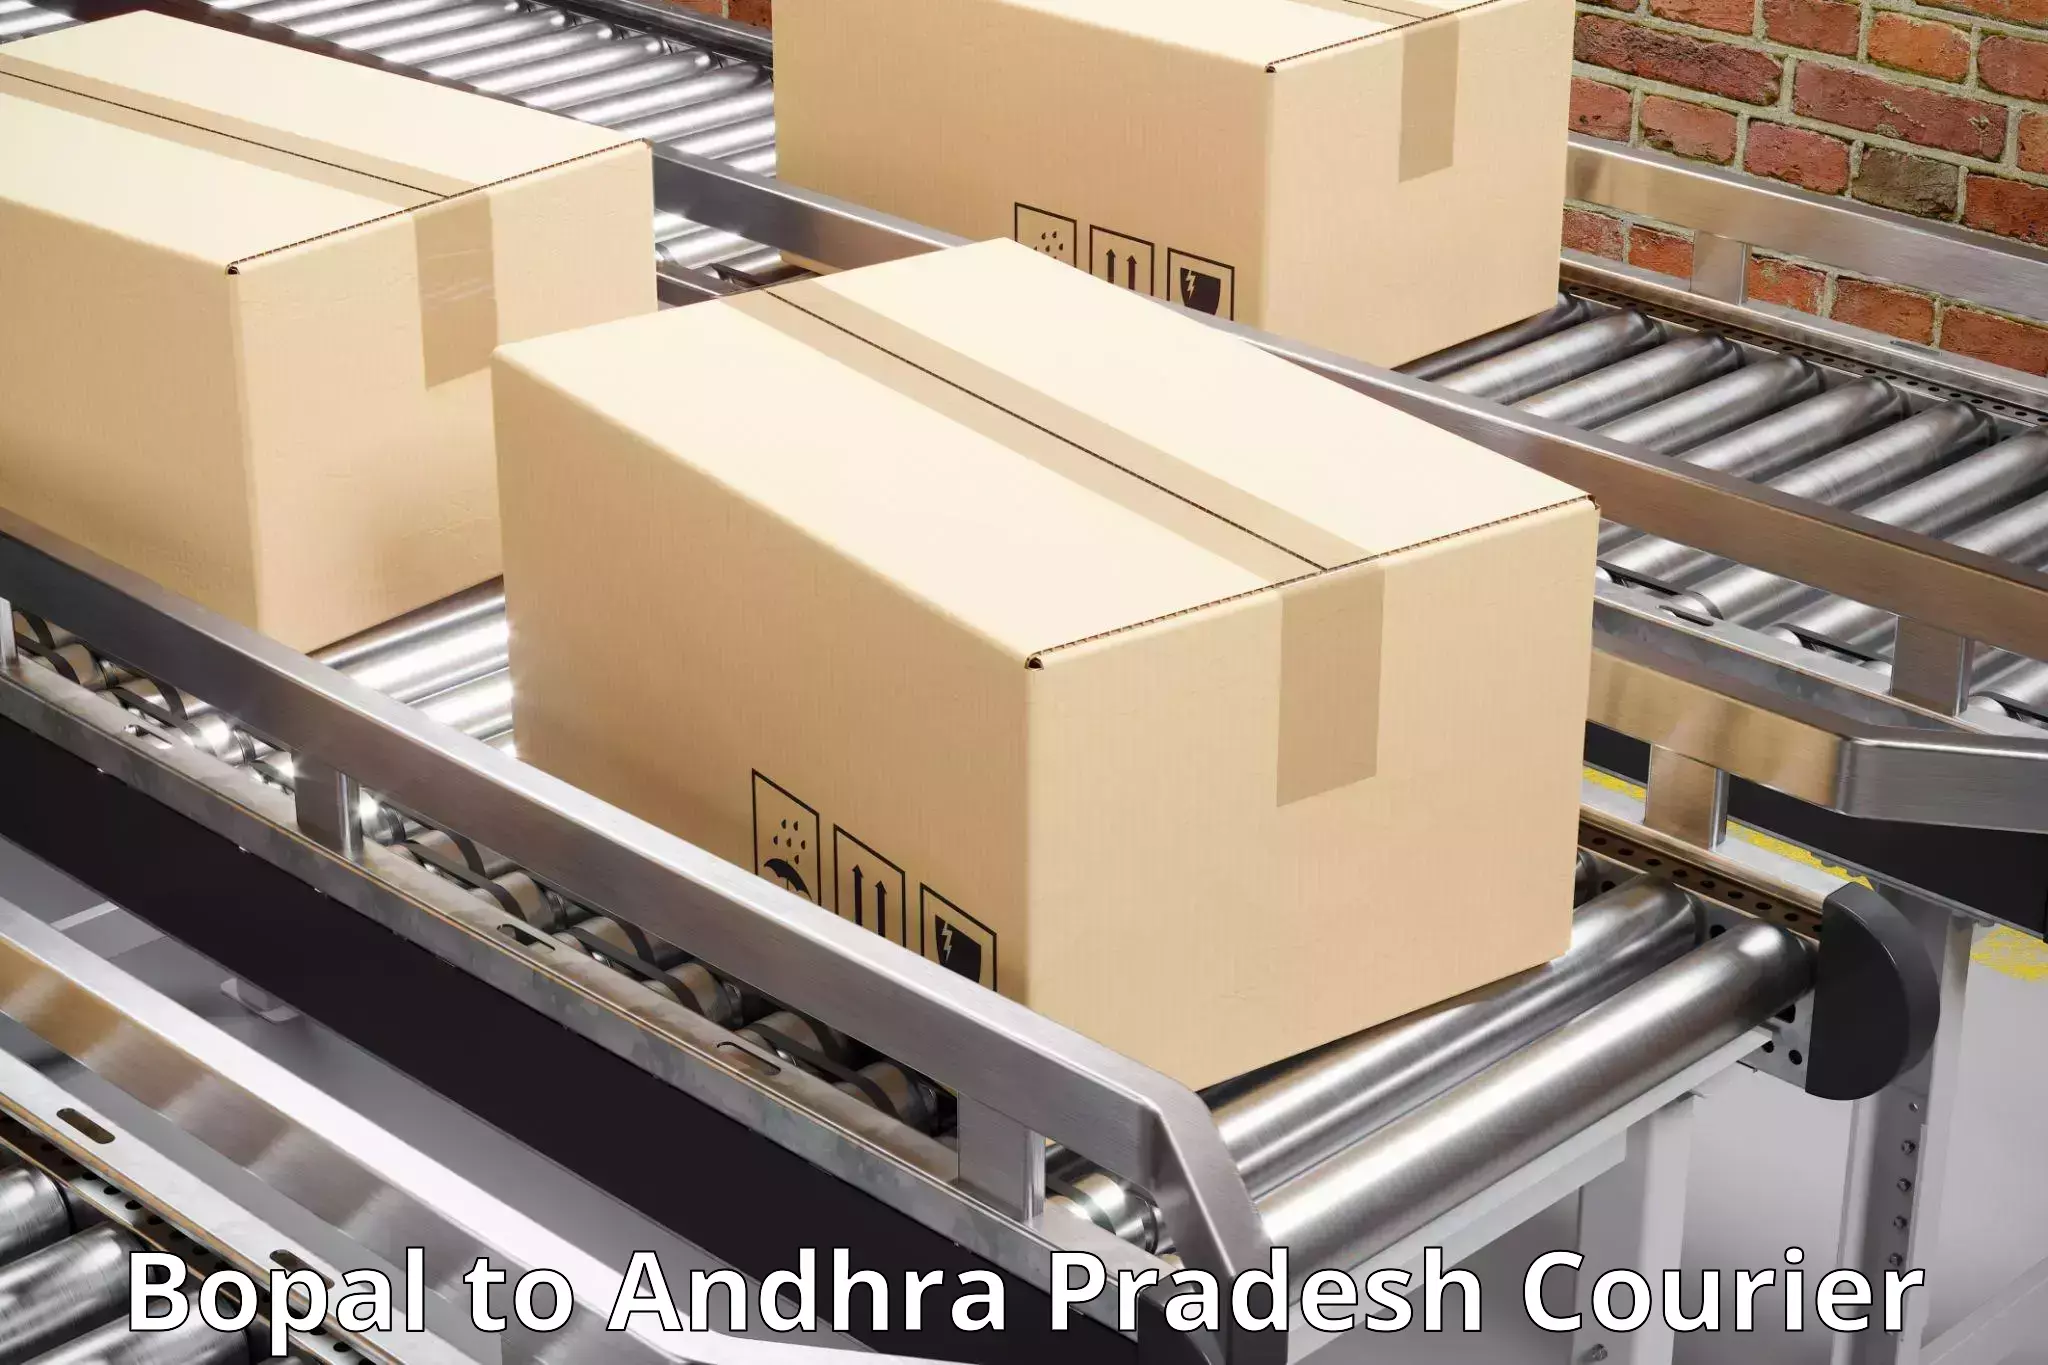 Round-the-clock parcel delivery Bopal to IIT Tirupati